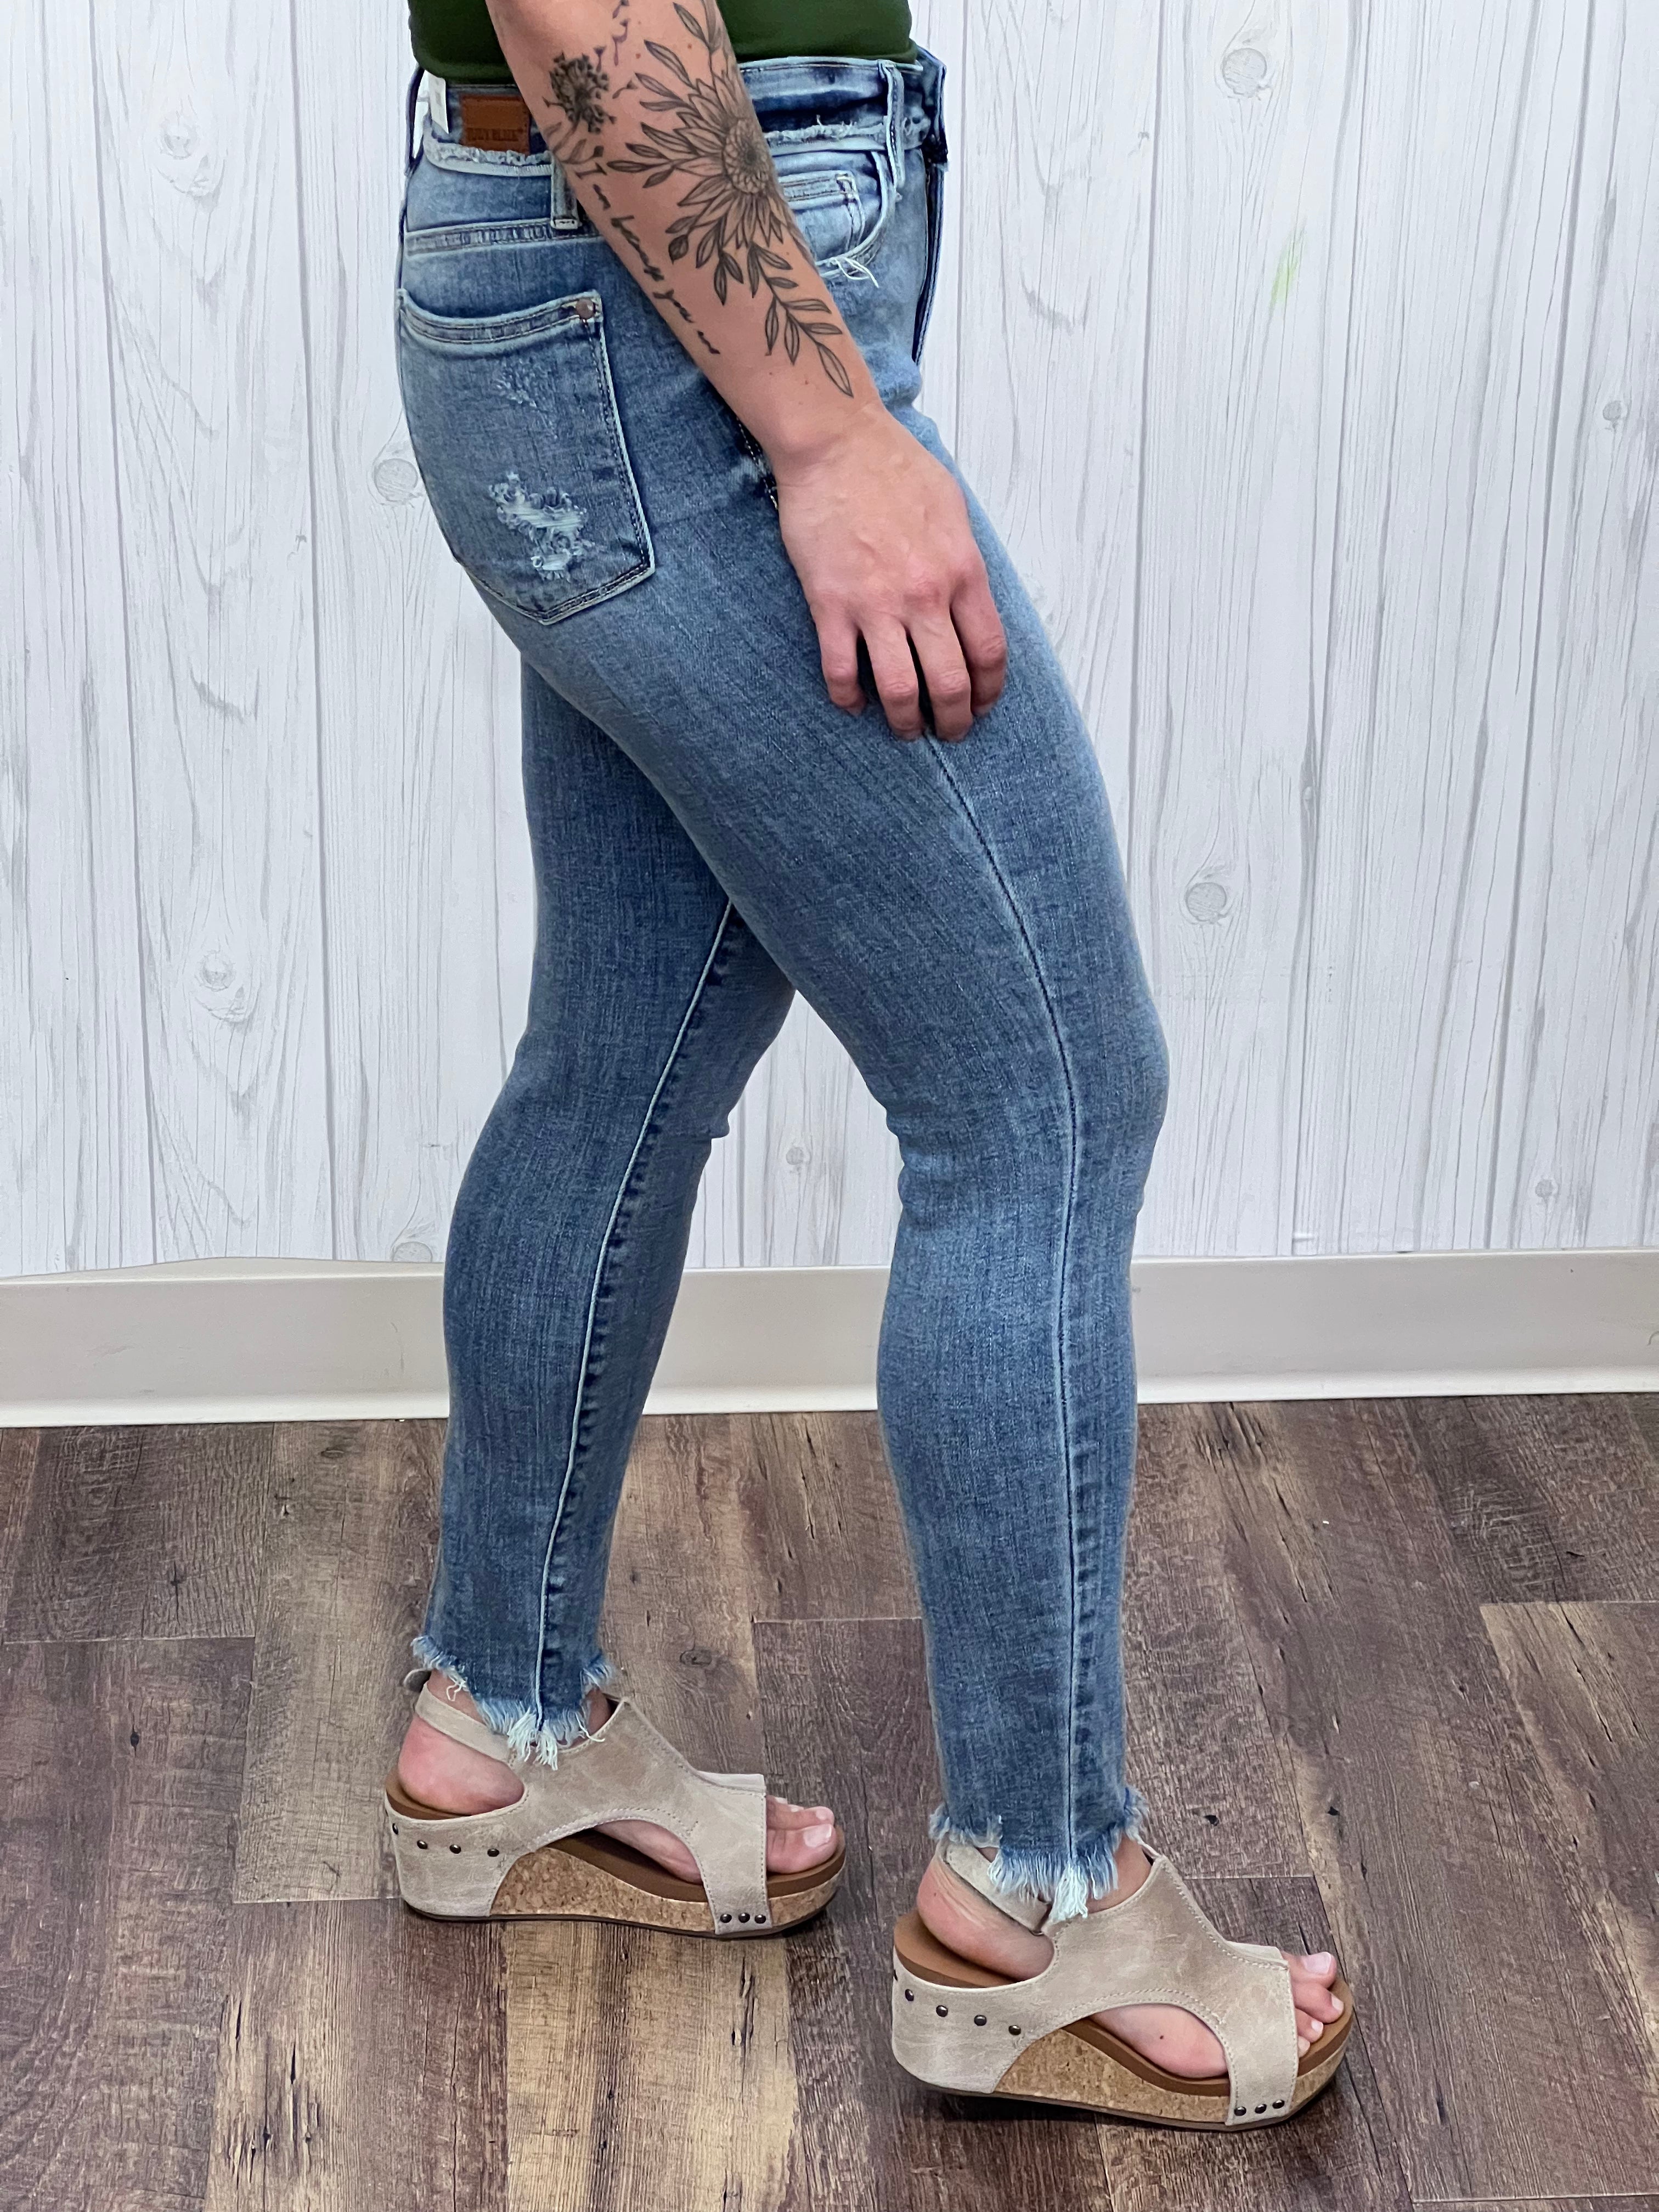 Show Up Judy Blue Skinny Jeans